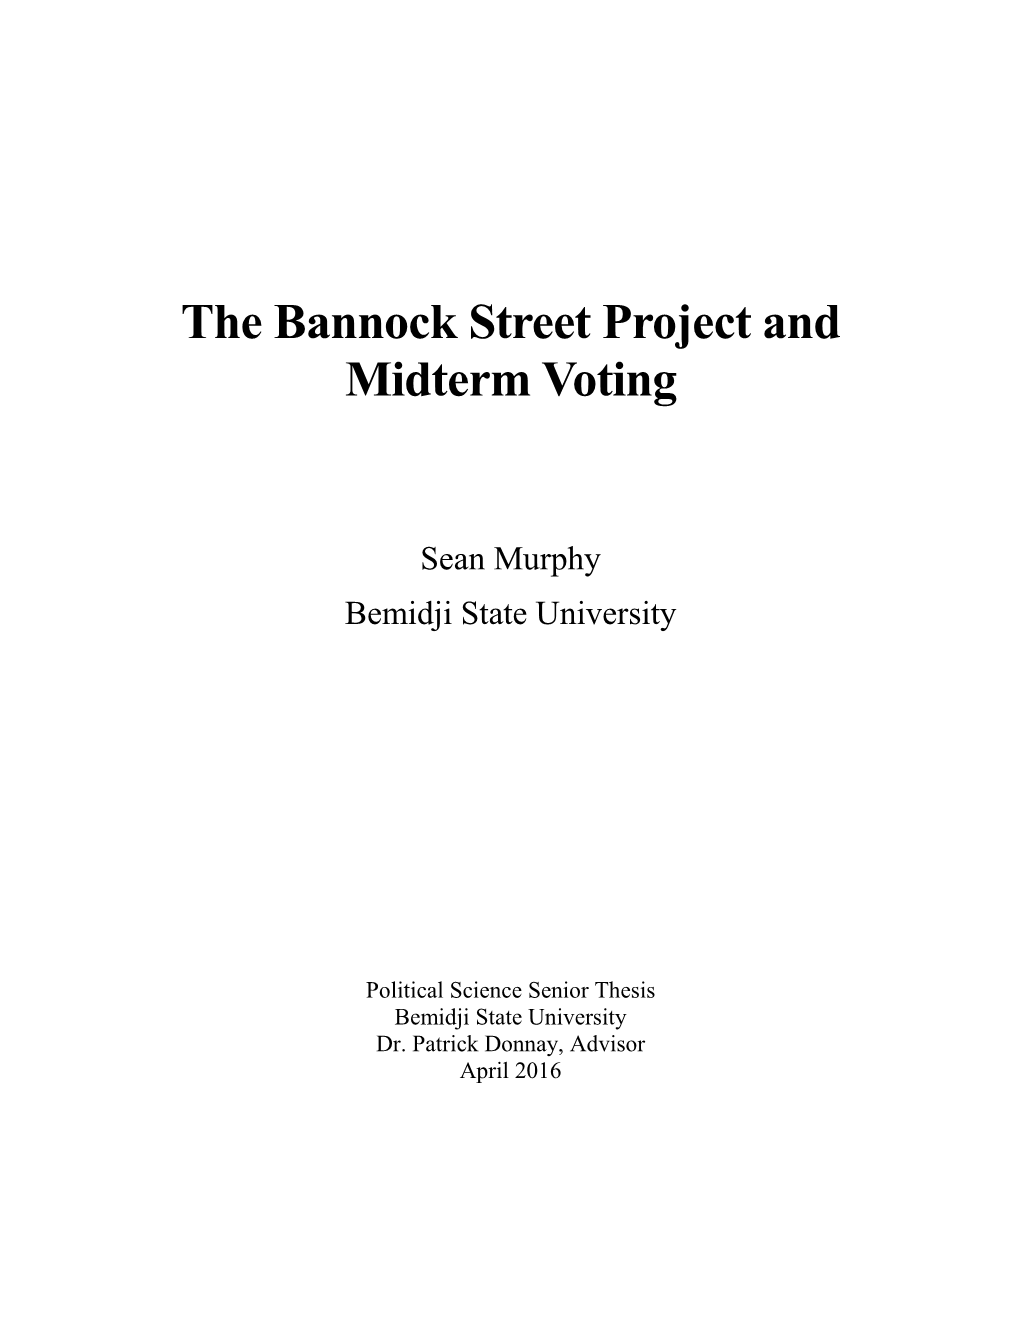 The Bannock Street Project and Midterm Voting